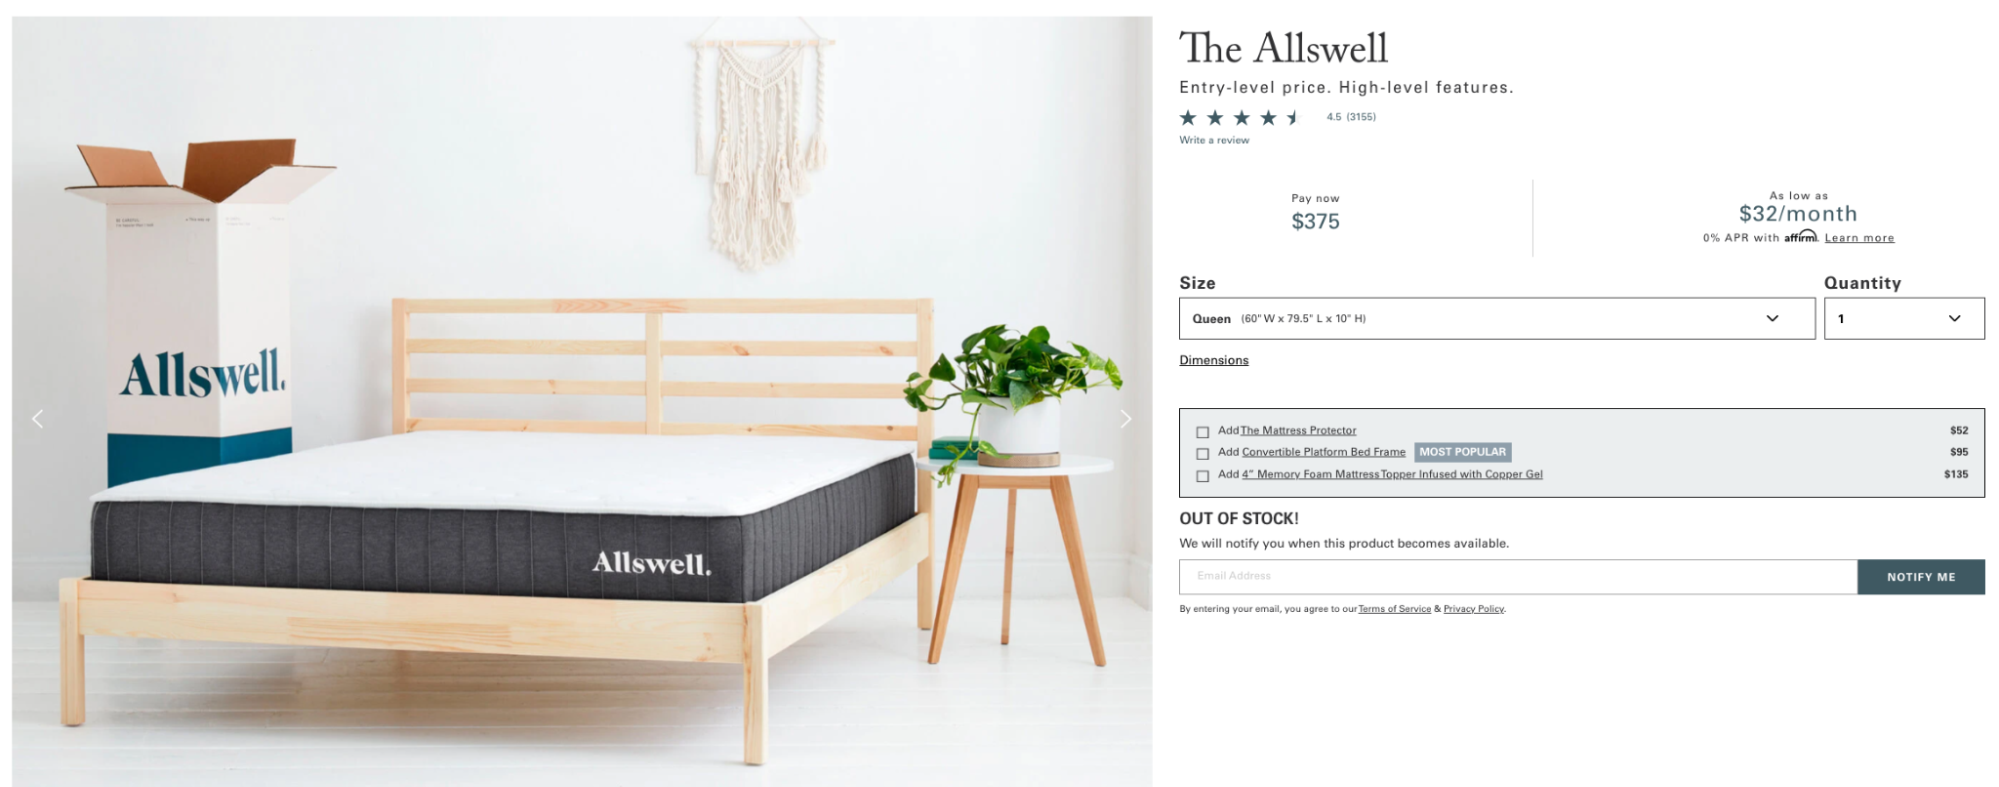 The Allswell product page